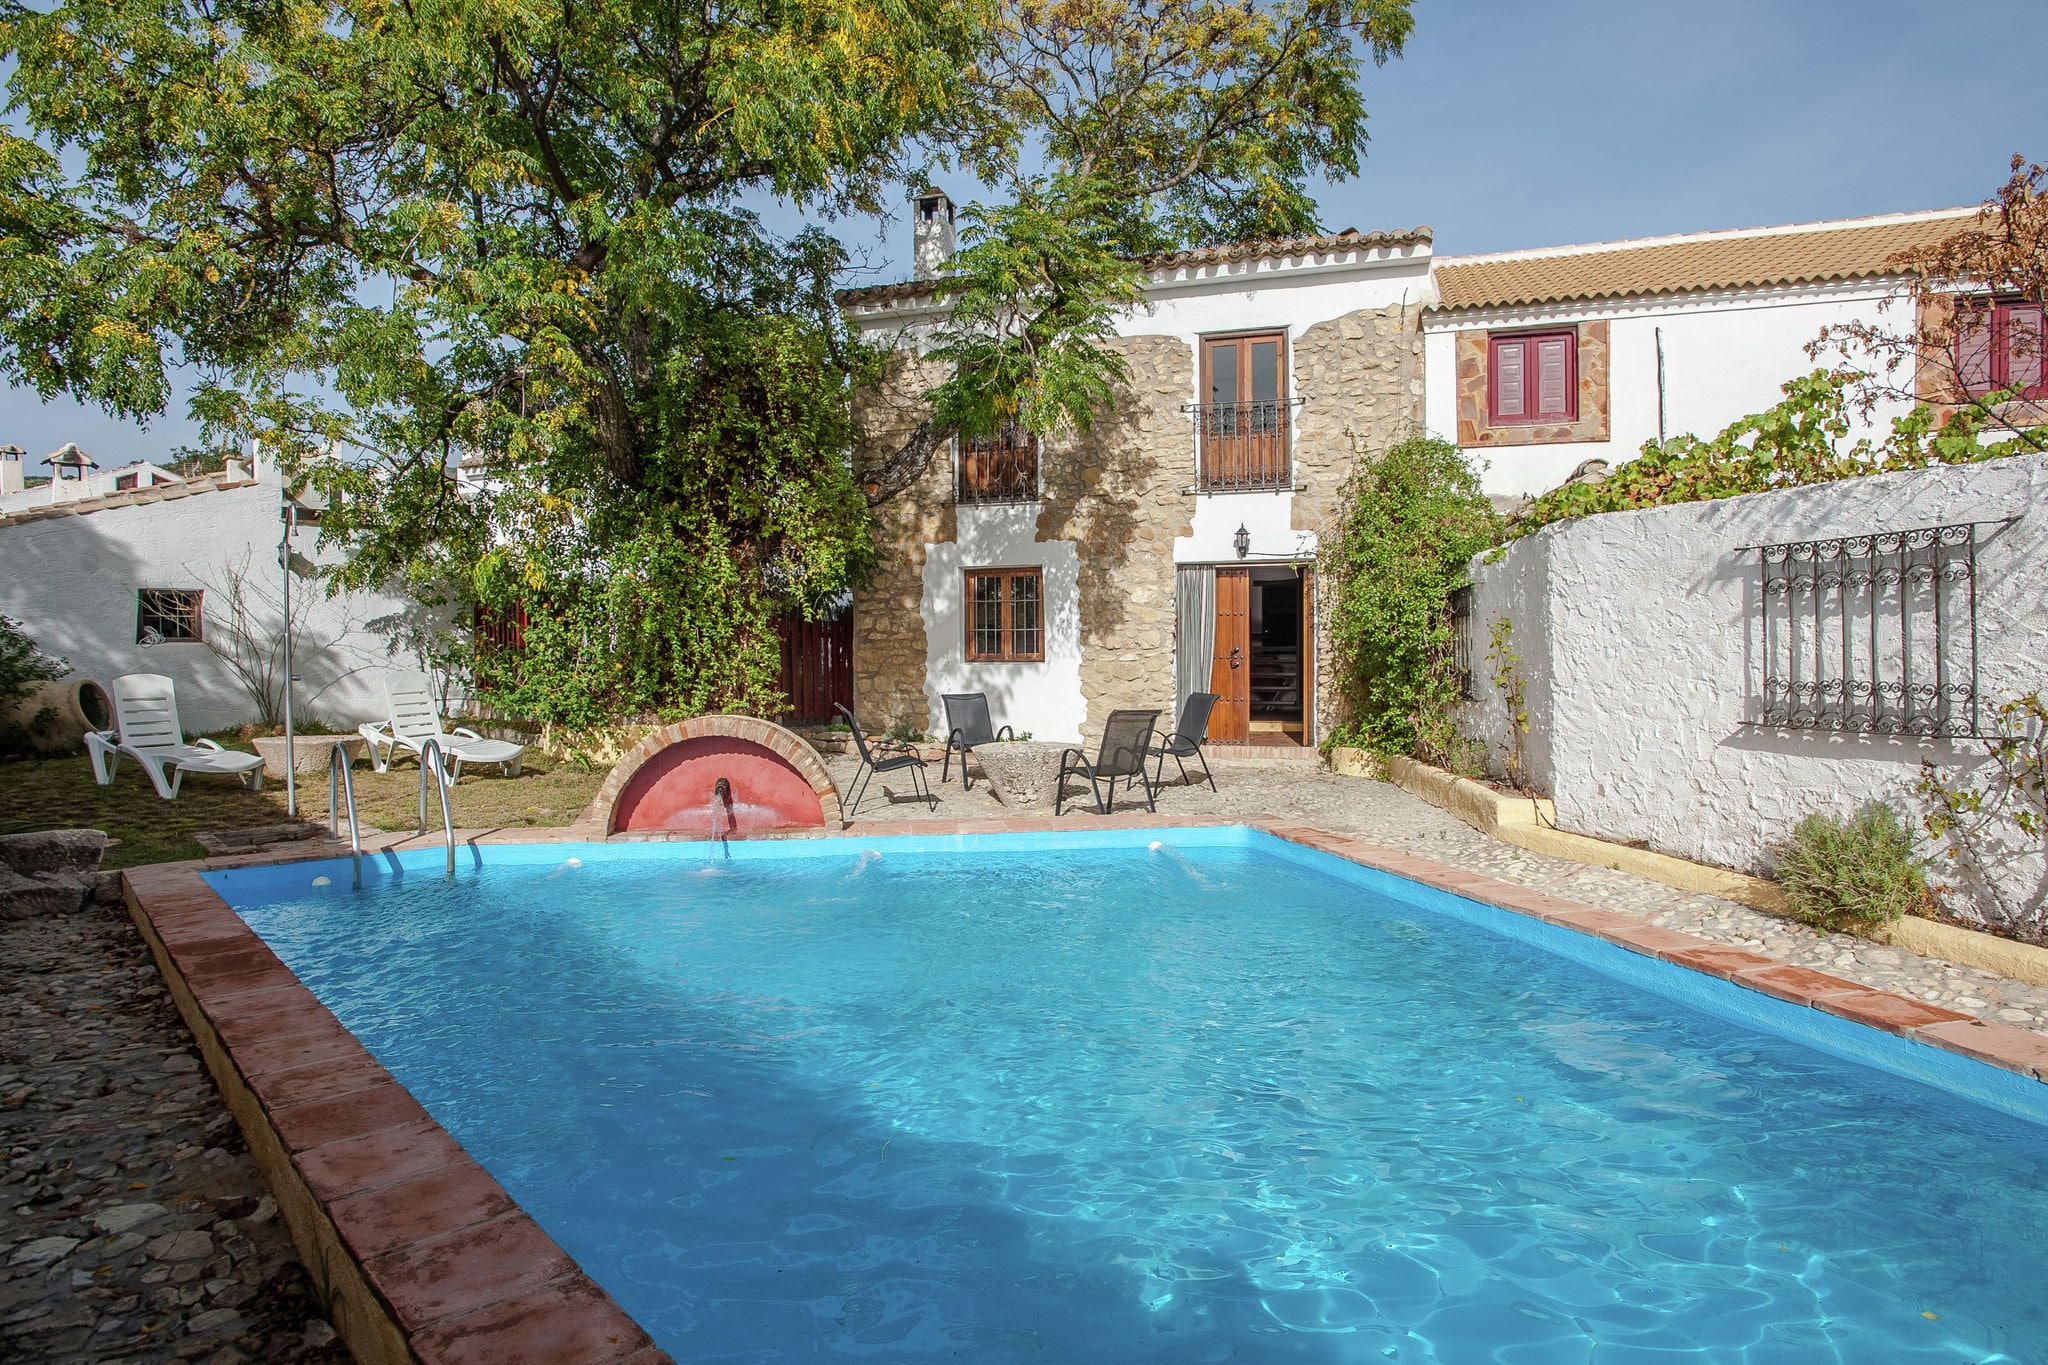 Restored mill with private swimming pool on a property in Algarinejo,  Granada